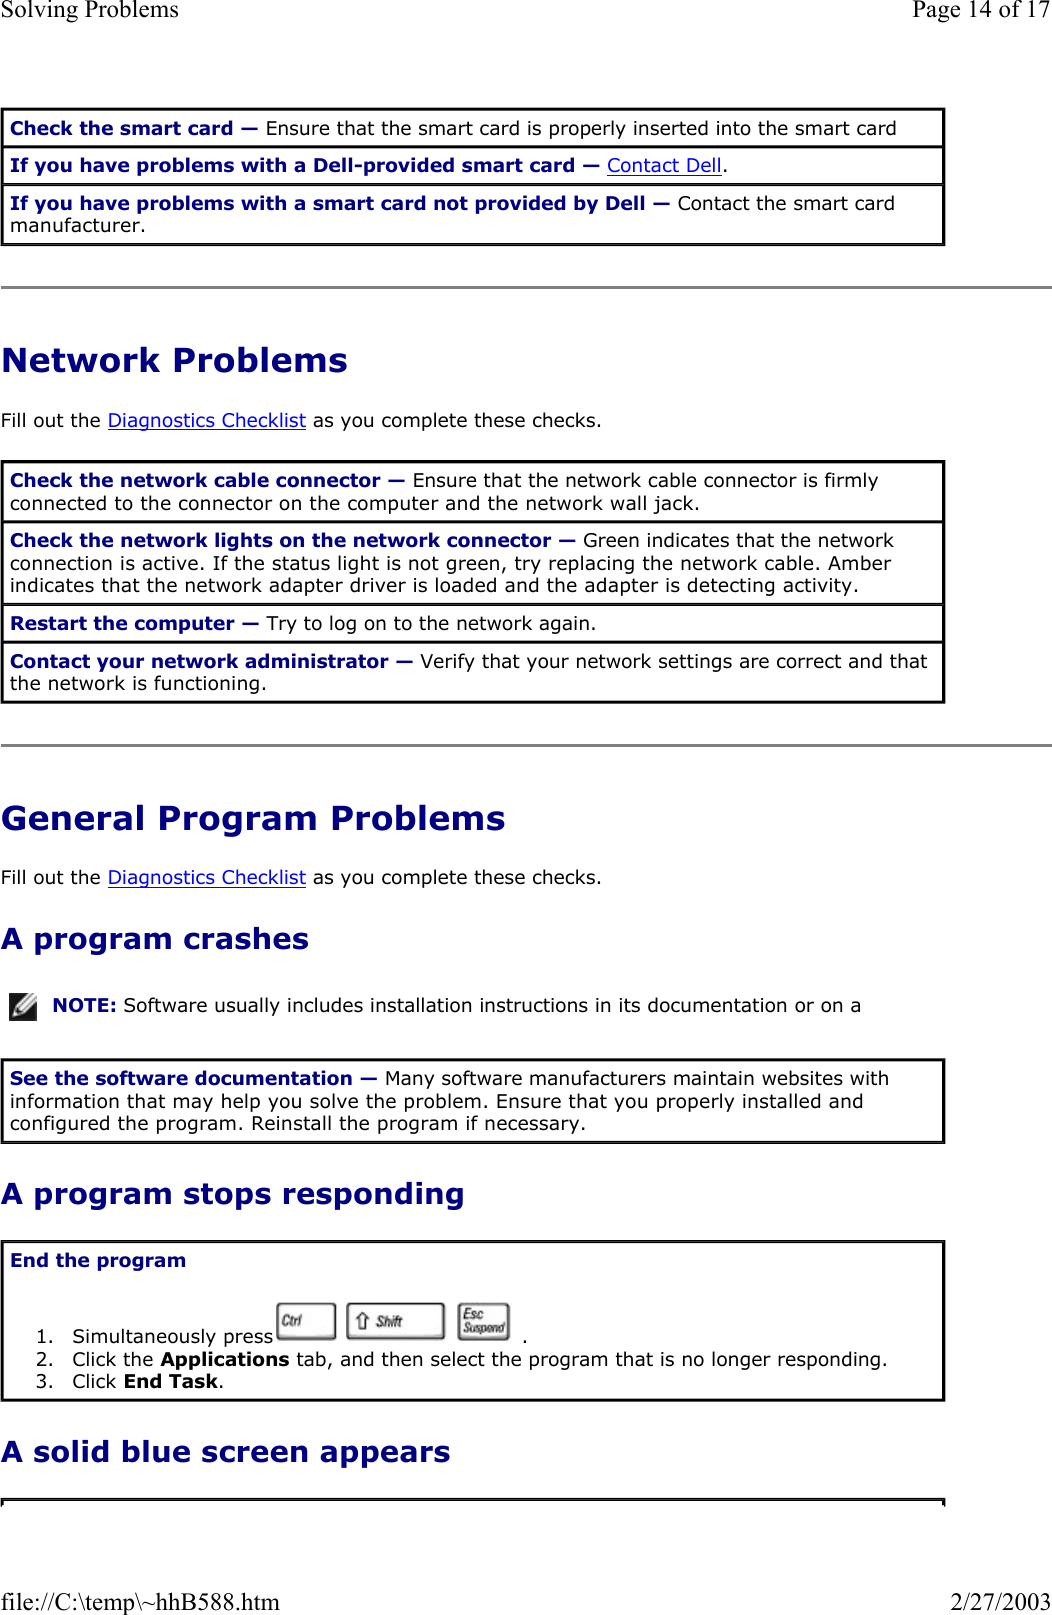 Network Problems Fill out the Diagnostics Checklist as you complete these checks. General Program Problems Fill out the Diagnostics Checklist as you complete these checks. A program crashes A program stops responding A solid blue screen appears Check the smart card — Ensure that the smart card is properly inserted into the smart card If you have problems with a Dell-provided smart card — Contact Dell. If you have problems with a smart card not provided by Dell — Contact the smart card manufacturer. Check the network cable connector — Ensure that the network cable connector is firmly connected to the connector on the computer and the network wall jack. Check the network lights on the network connector — Green indicates that the network connection is active. If the status light is not green, try replacing the network cable. Amber indicates that the network adapter driver is loaded and the adapter is detecting activity. Restart the computer — Try to log on to the network again. Contact your network administrator — Verify that your network settings are correct and that the network is functioning. NOTE: Software usually includes installation instructions in its documentation or on a See the software documentation — Many software manufacturers maintain websites with information that may help you solve the problem. Ensure that you properly installed and configured the program. Reinstall the program if necessary. End the program 1. Simultaneously press       .  2. Click the Applications tab, and then select the program that is no longer responding.  3. Click End Task.  Page 14 of 17Solving Problems2/27/2003file://C:\temp\~hhB588.htm